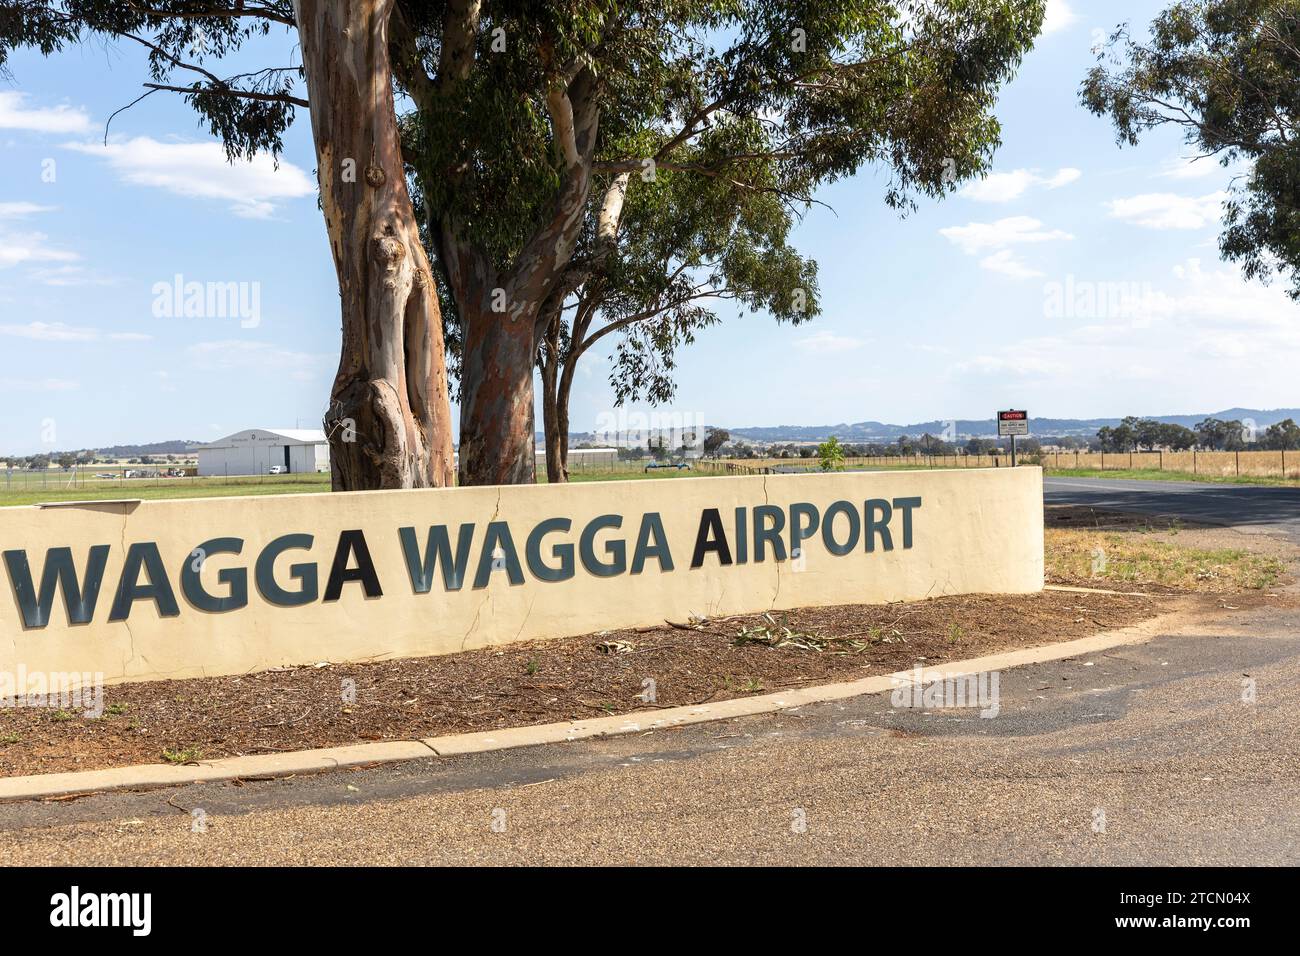 Wagga Wagga regional airport in New South Wales Australia both Qantas and Rex airlines fly to Wagga Wagga ,NSW,Australia Stock Photo